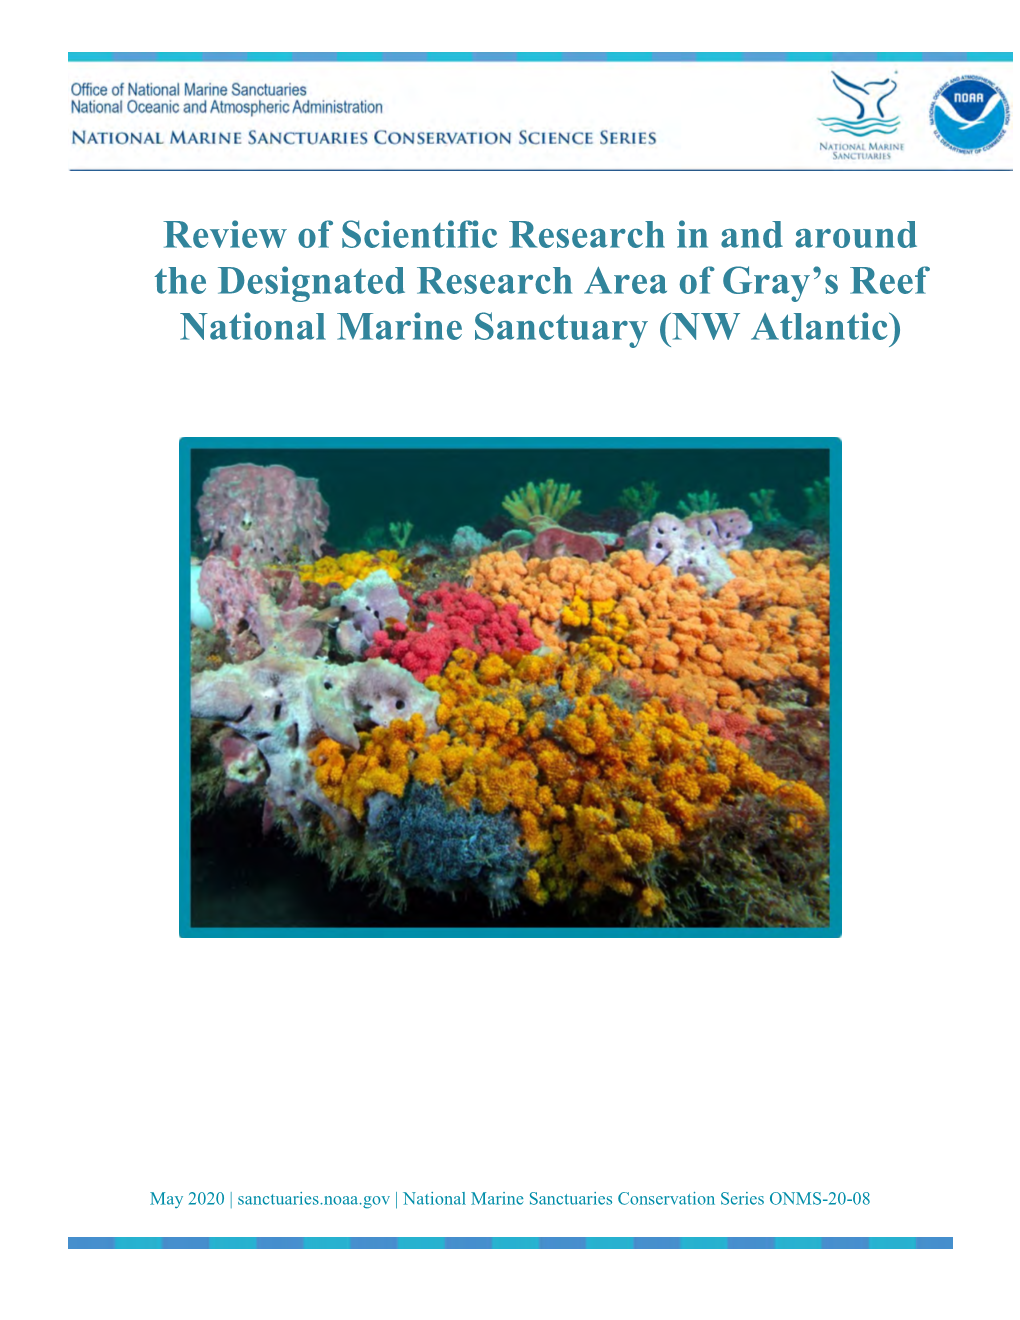 Review of Scientific Research in and Around the Designated Research Area of Gray's Reef National Marine Sanctuary (NW Atlantic)